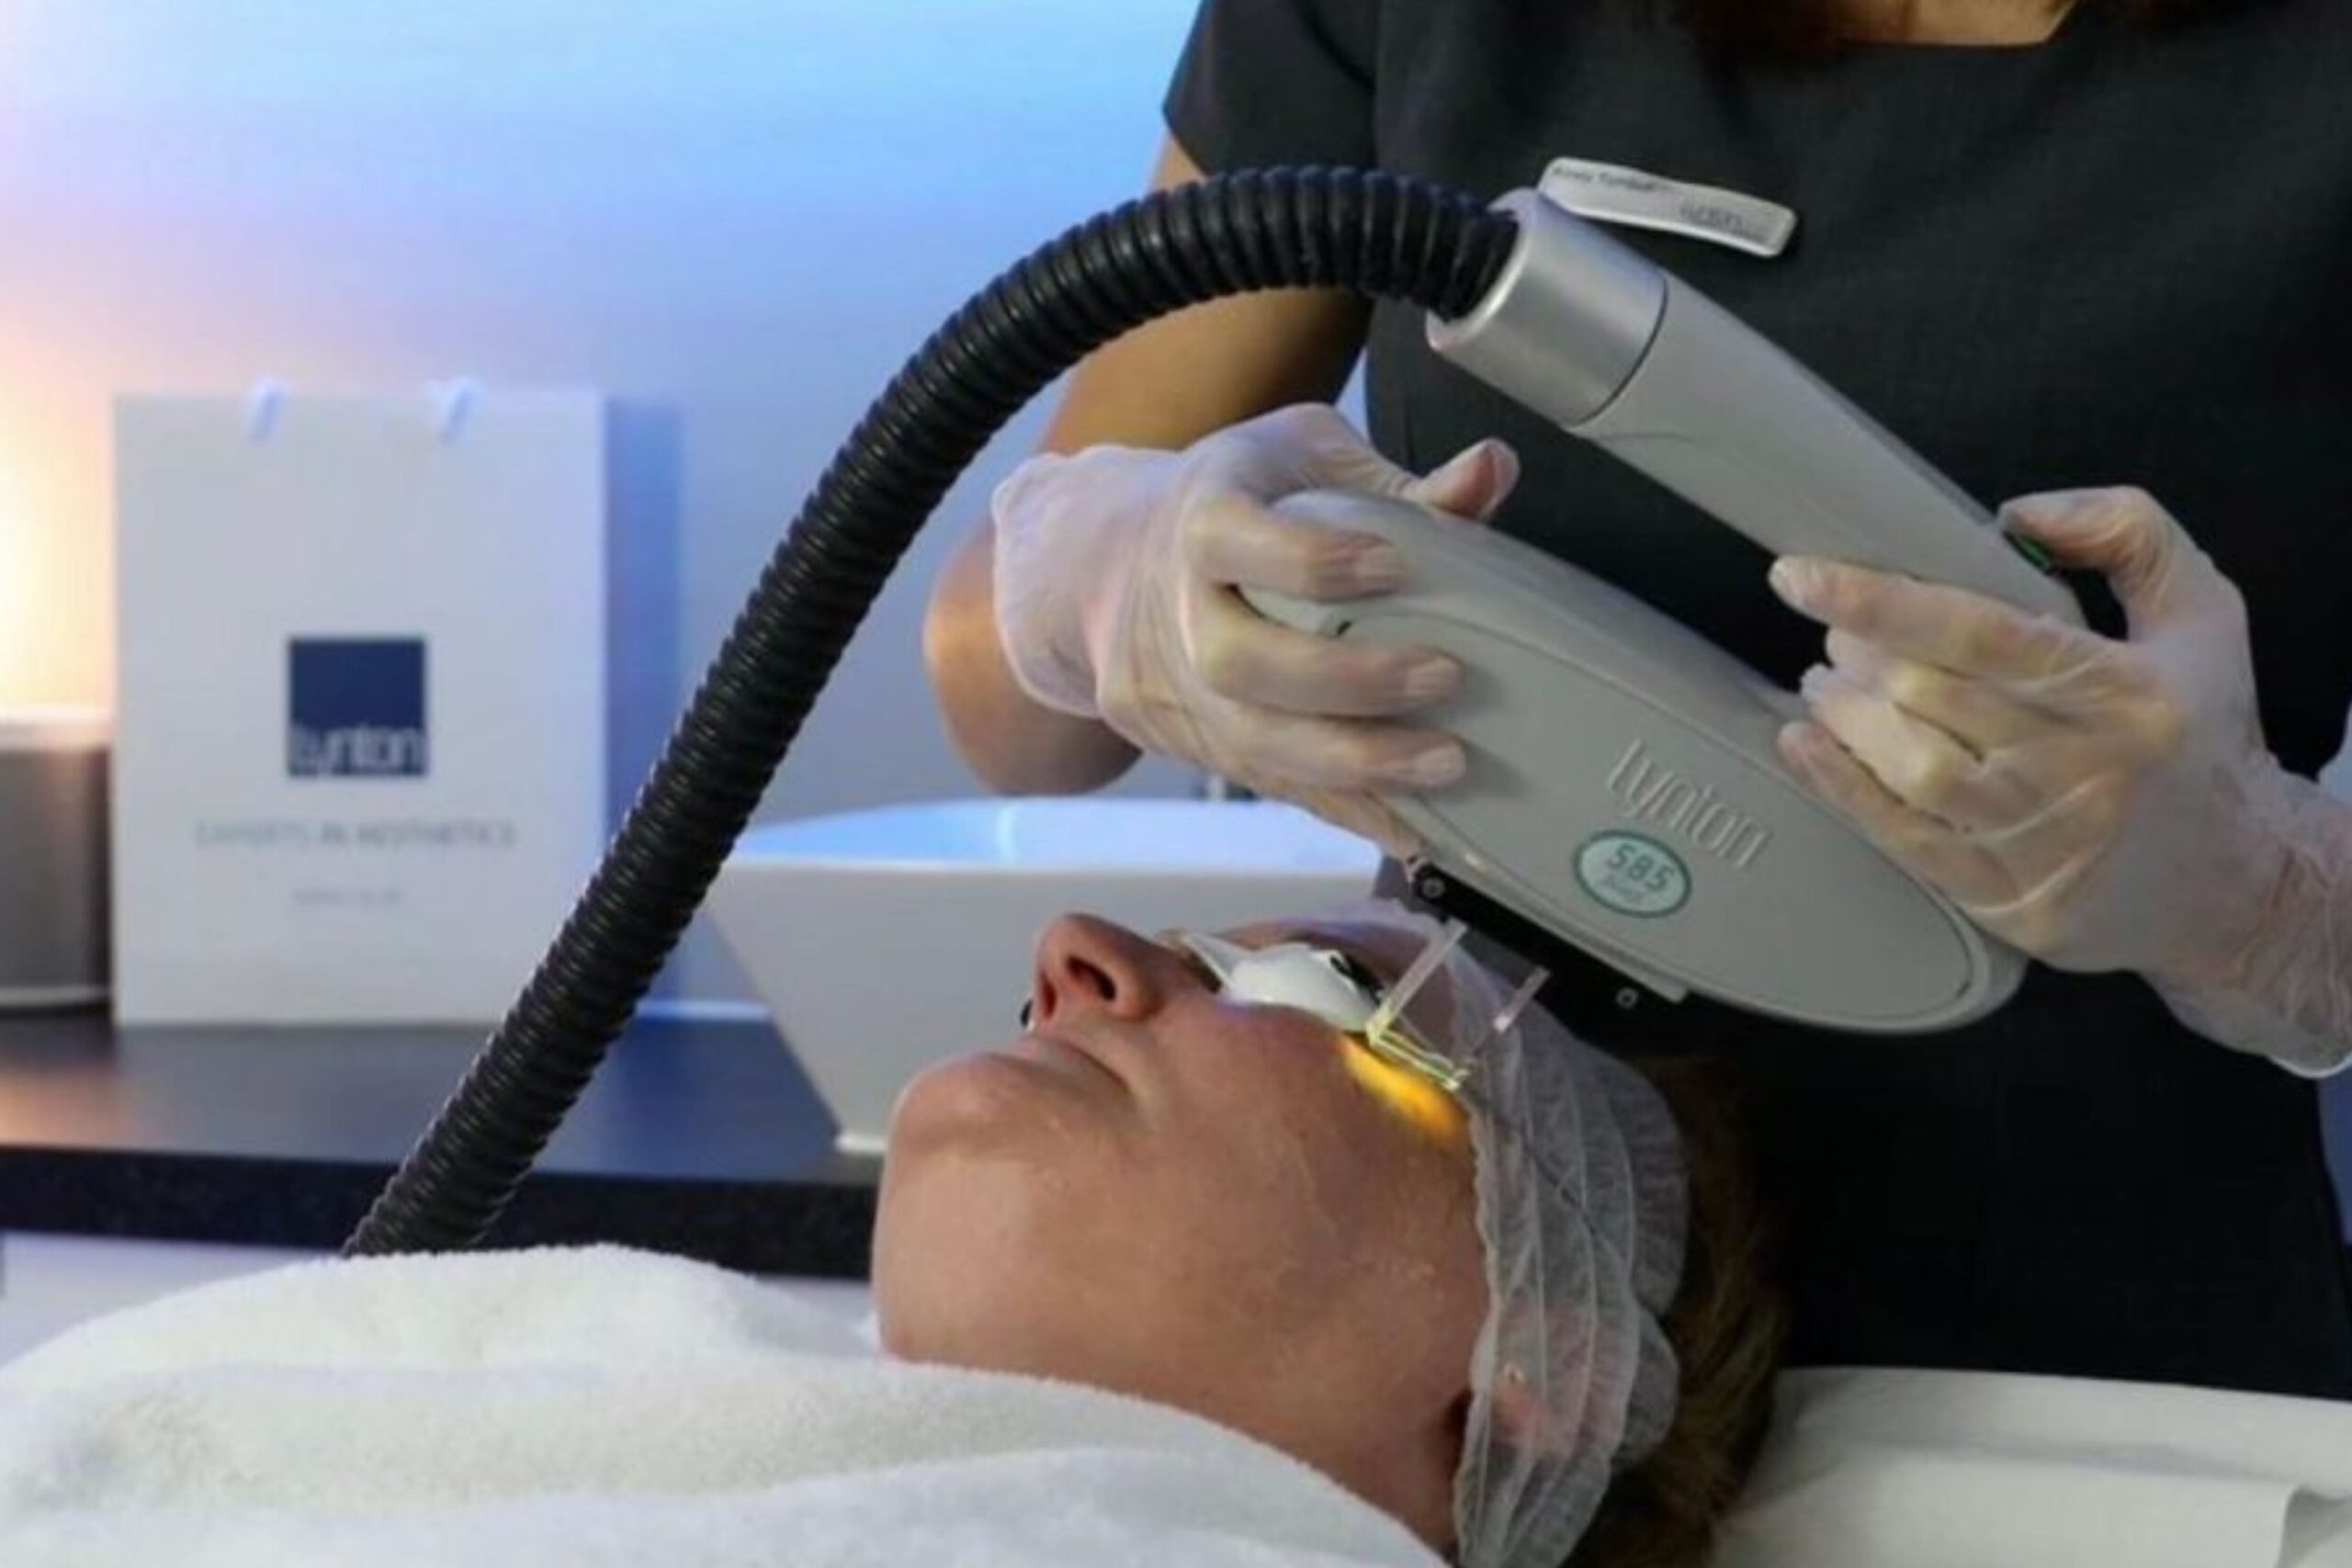 Photofacial for enlarged pores at Freyja Medical in Wrexham, Nantwich and Cheshire